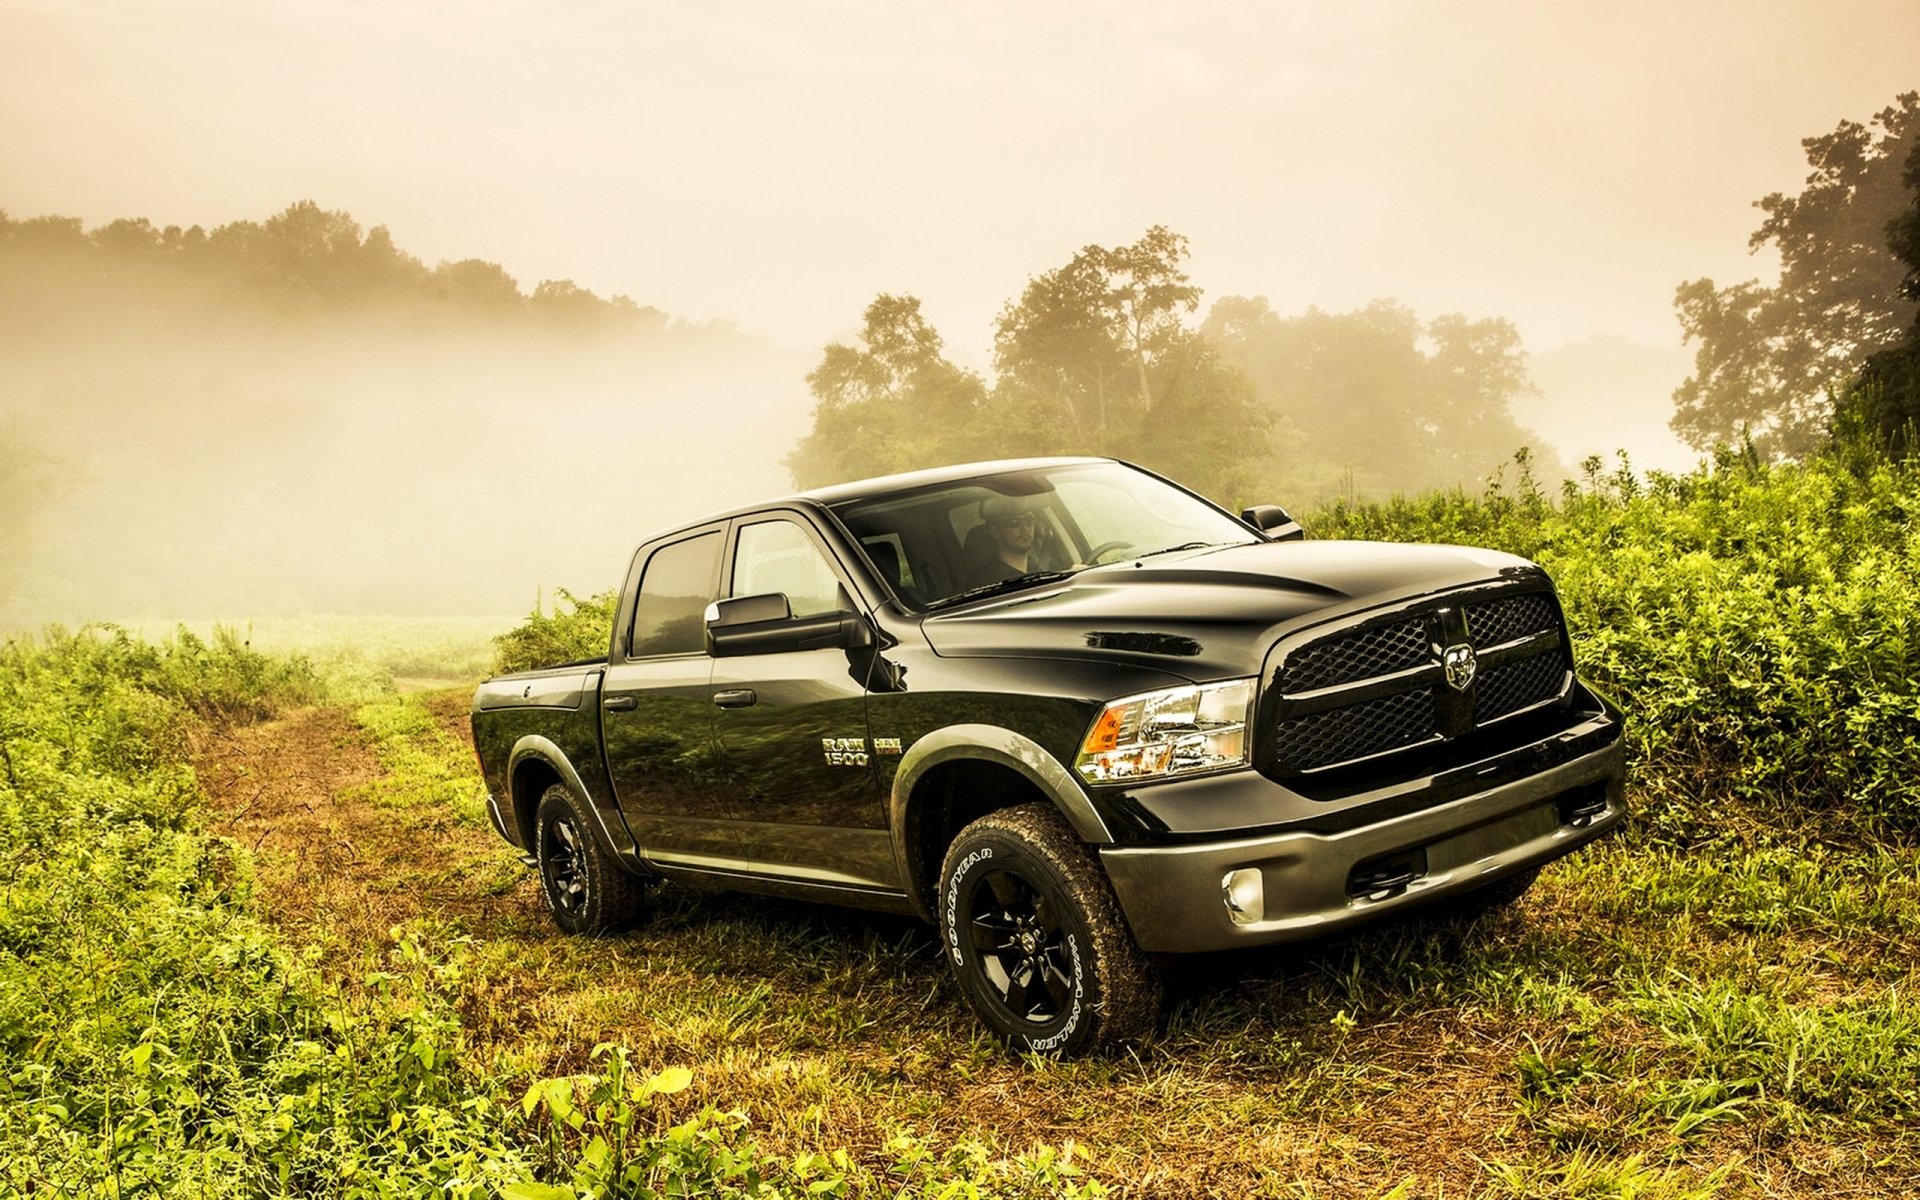 Ram 1500, The bold and powerful, HD wallpapers and backgrounds, Dodge beauty, 1920x1200 HD Desktop